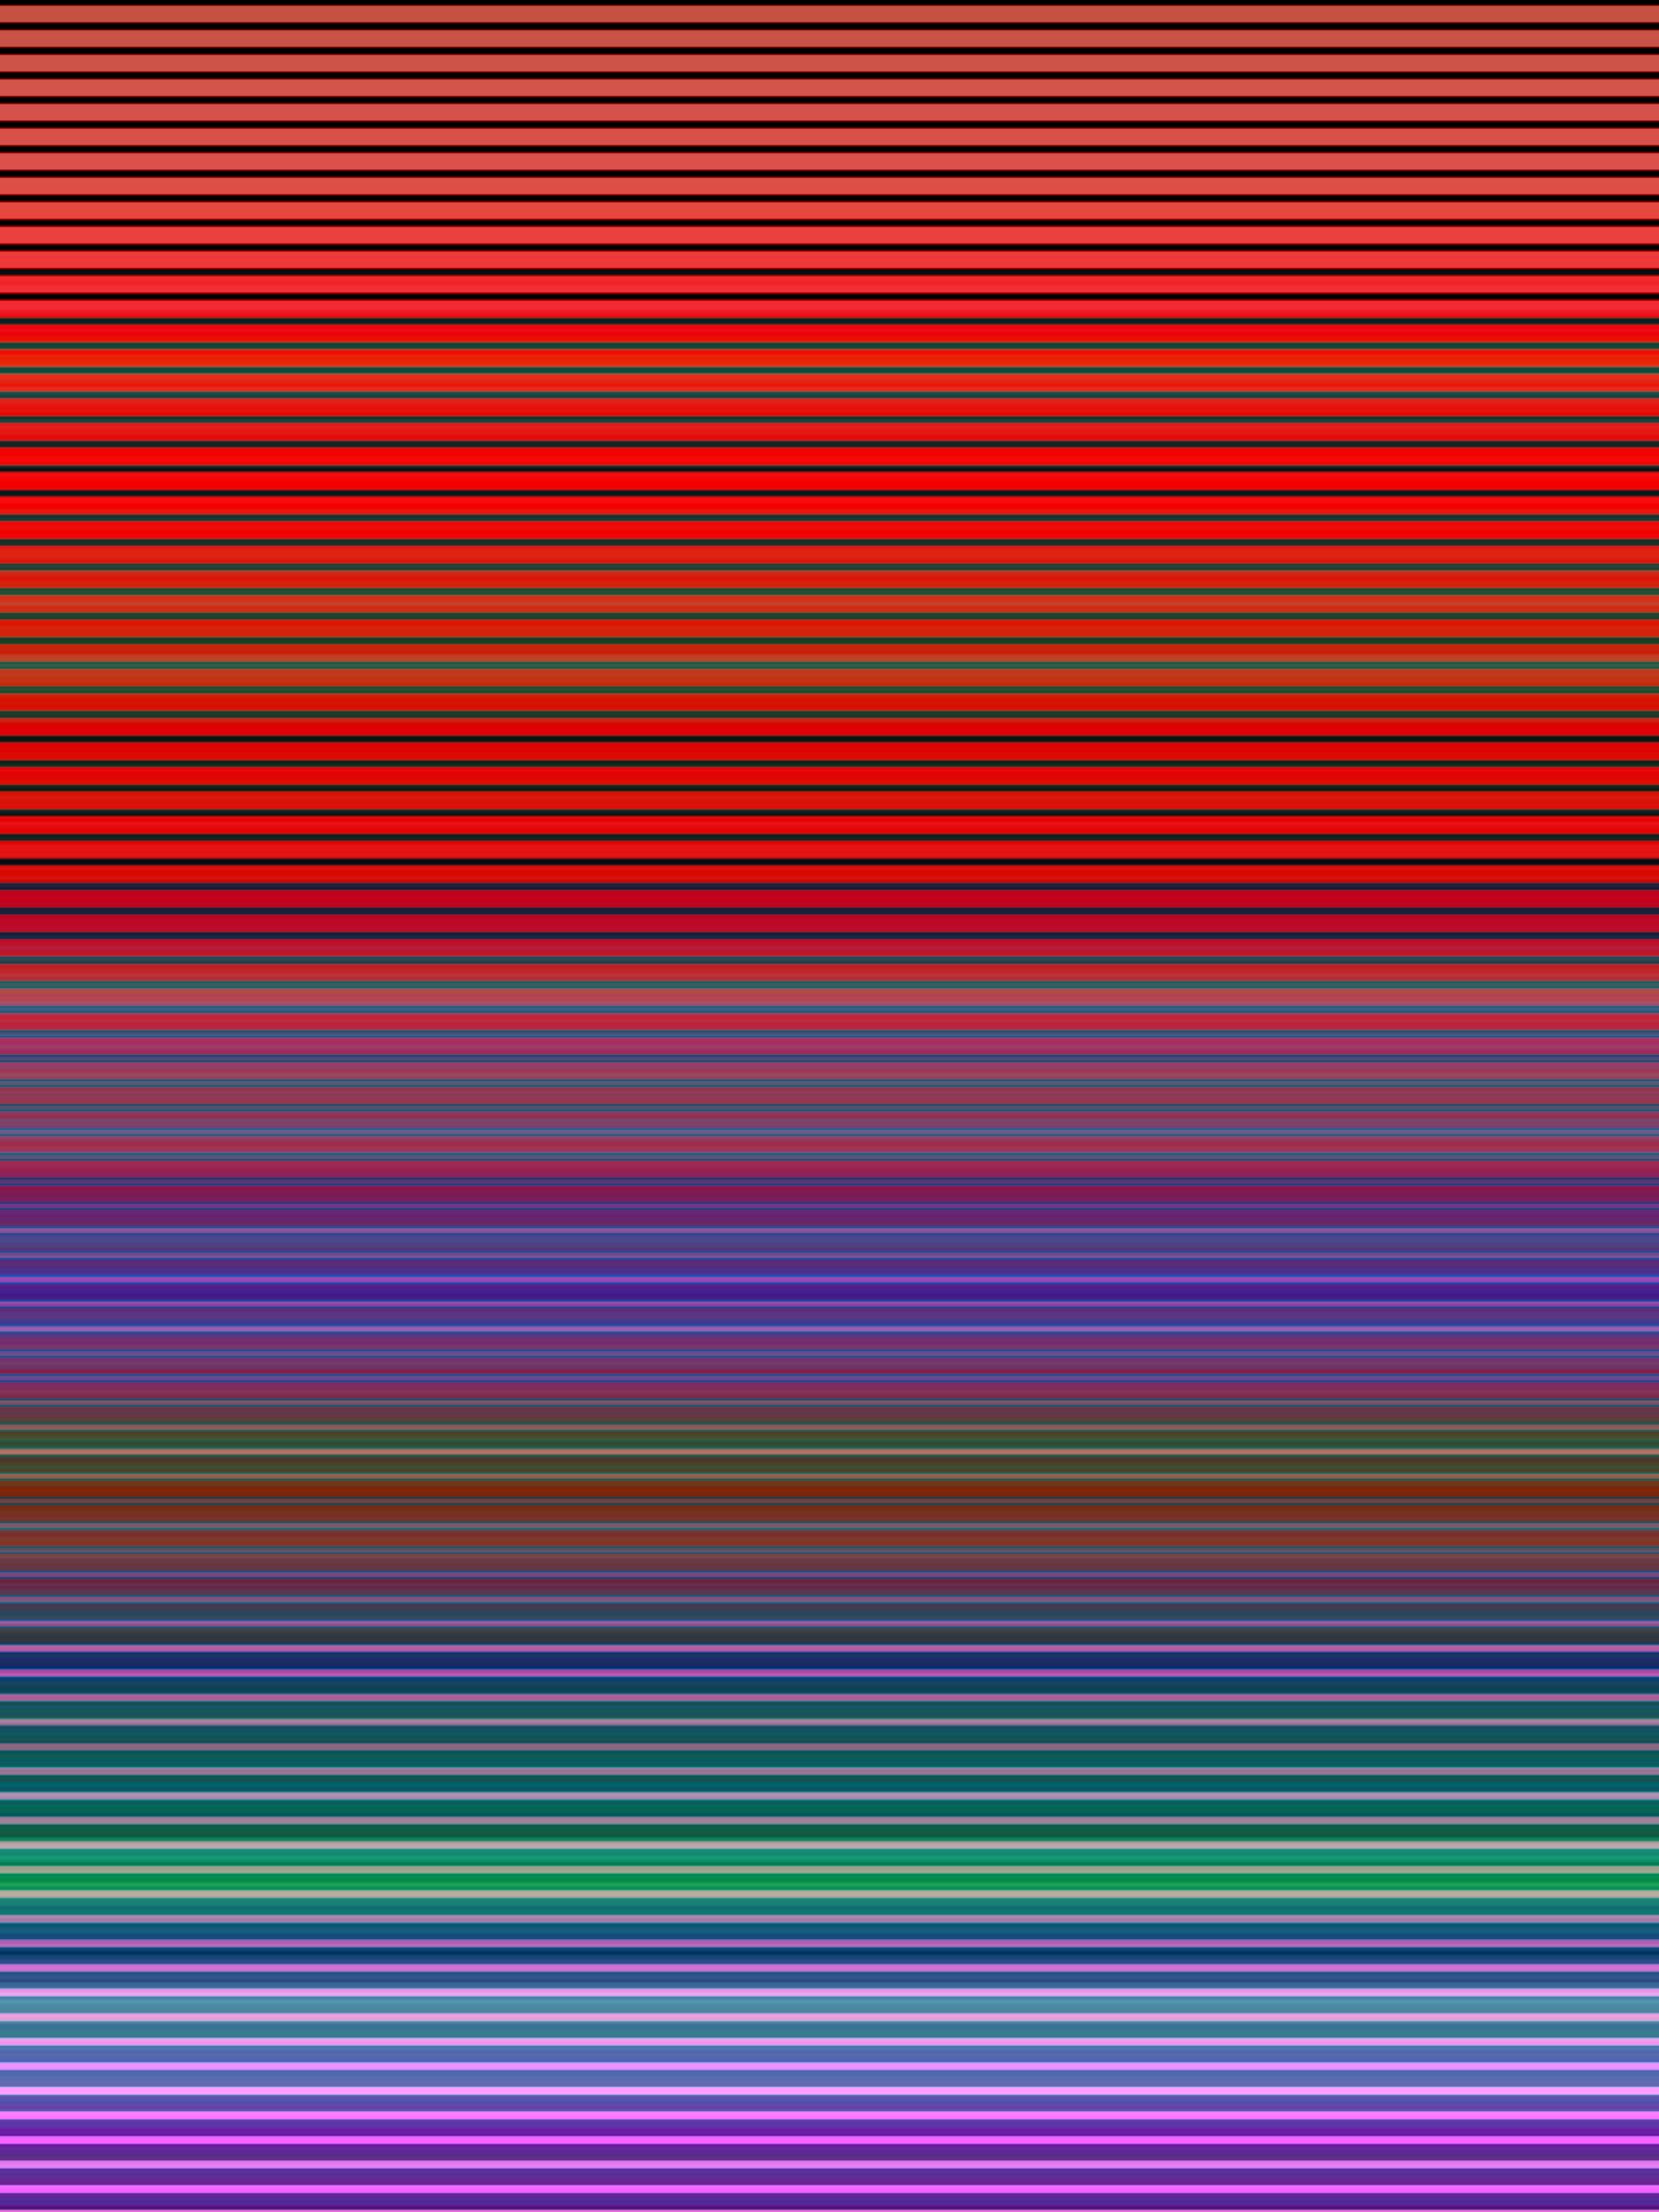 Horizontally colored lines